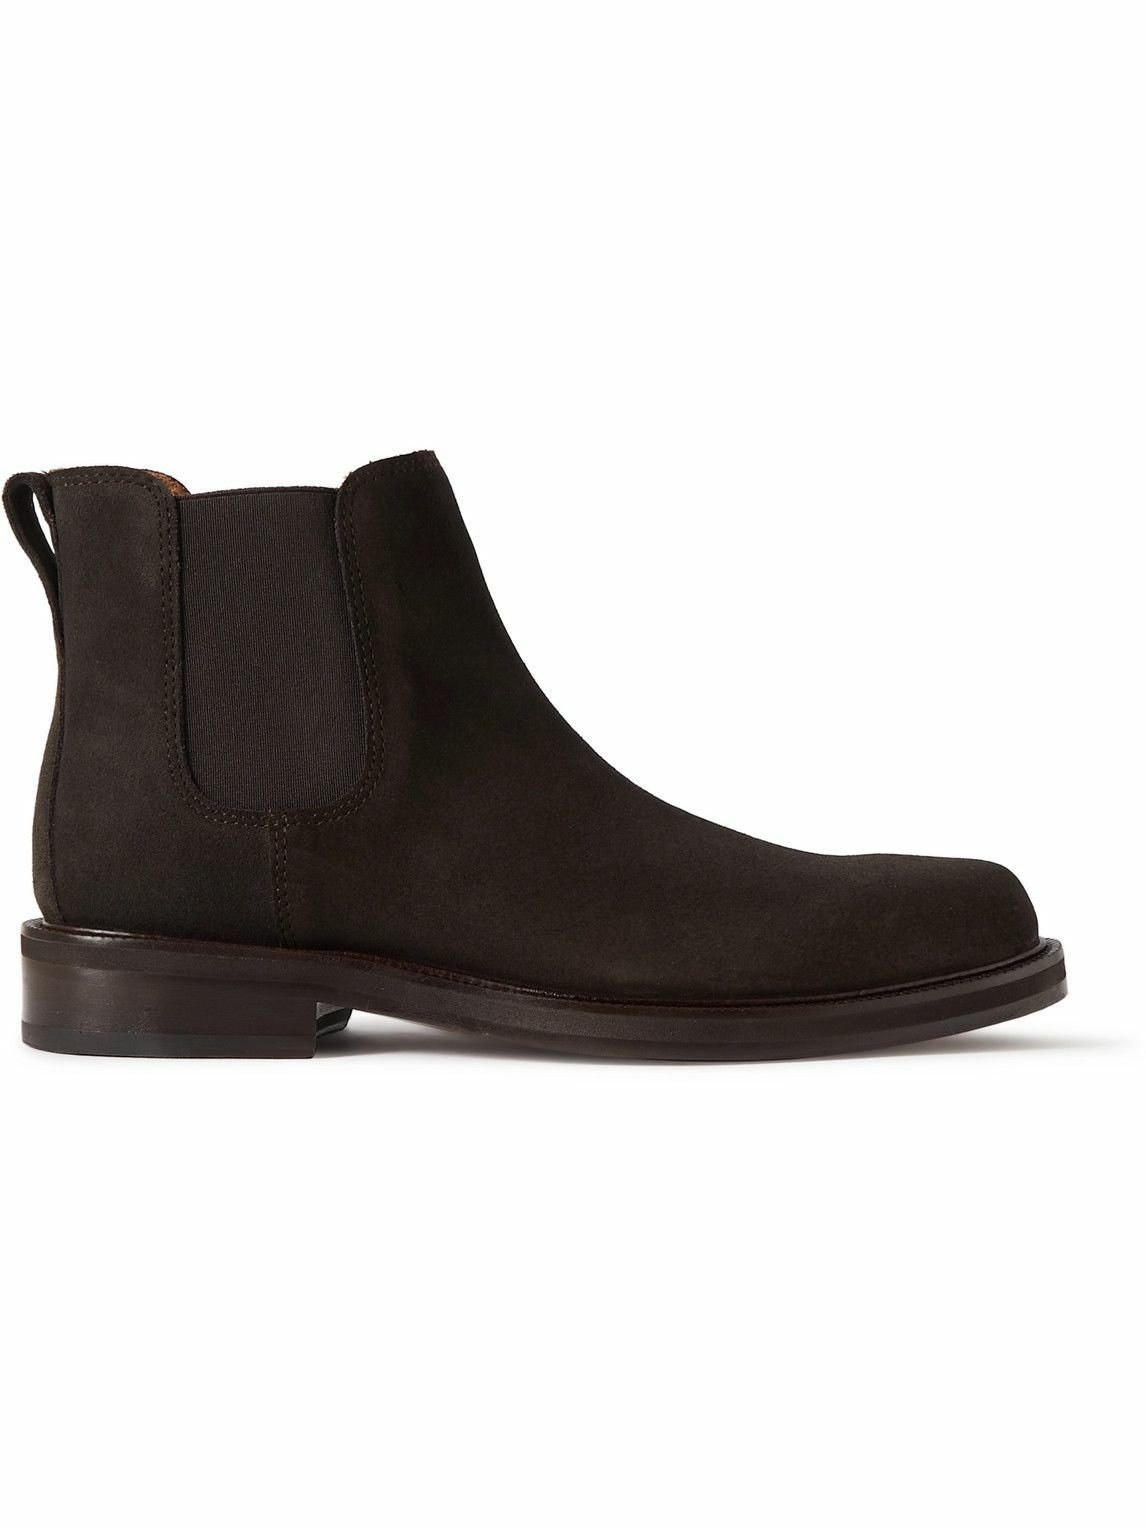 Photo: Mr P. - Olie Suede Chelsea Boots - Brown